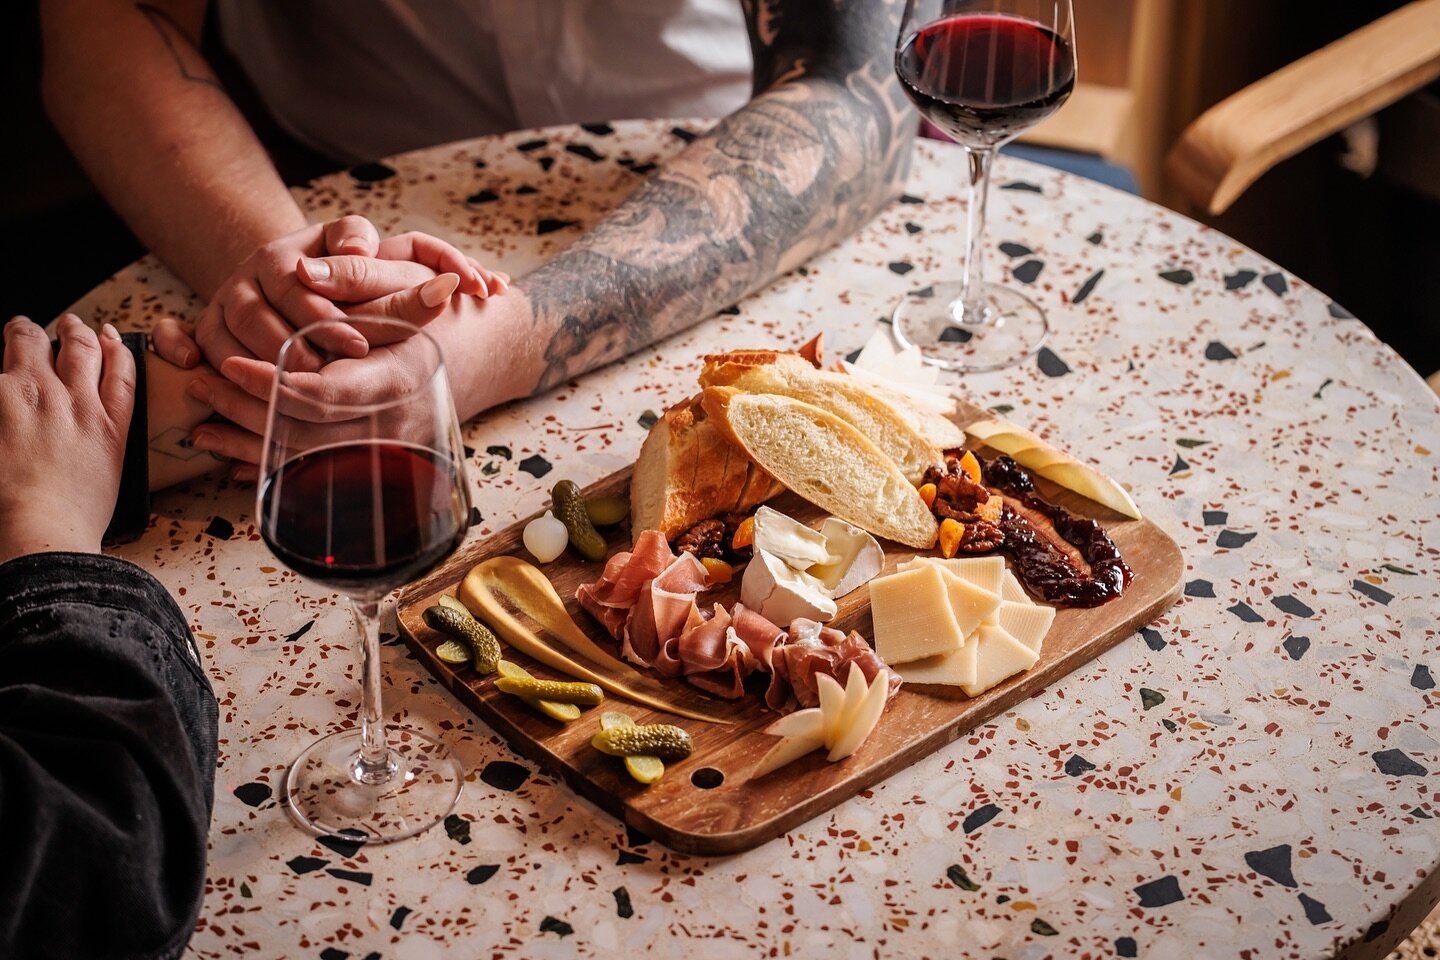 Nothing says &ldquo;I love you&rdquo; like wine and cheese😍🧀🍷

Celebrate this Valentine&rsquo;s Day with us at The Wild - featuring our $60 charcuterie and wine bottle special!

Not feeling wine? Try one of our special $25 cocktail pairs🍸❤️🍹

Th